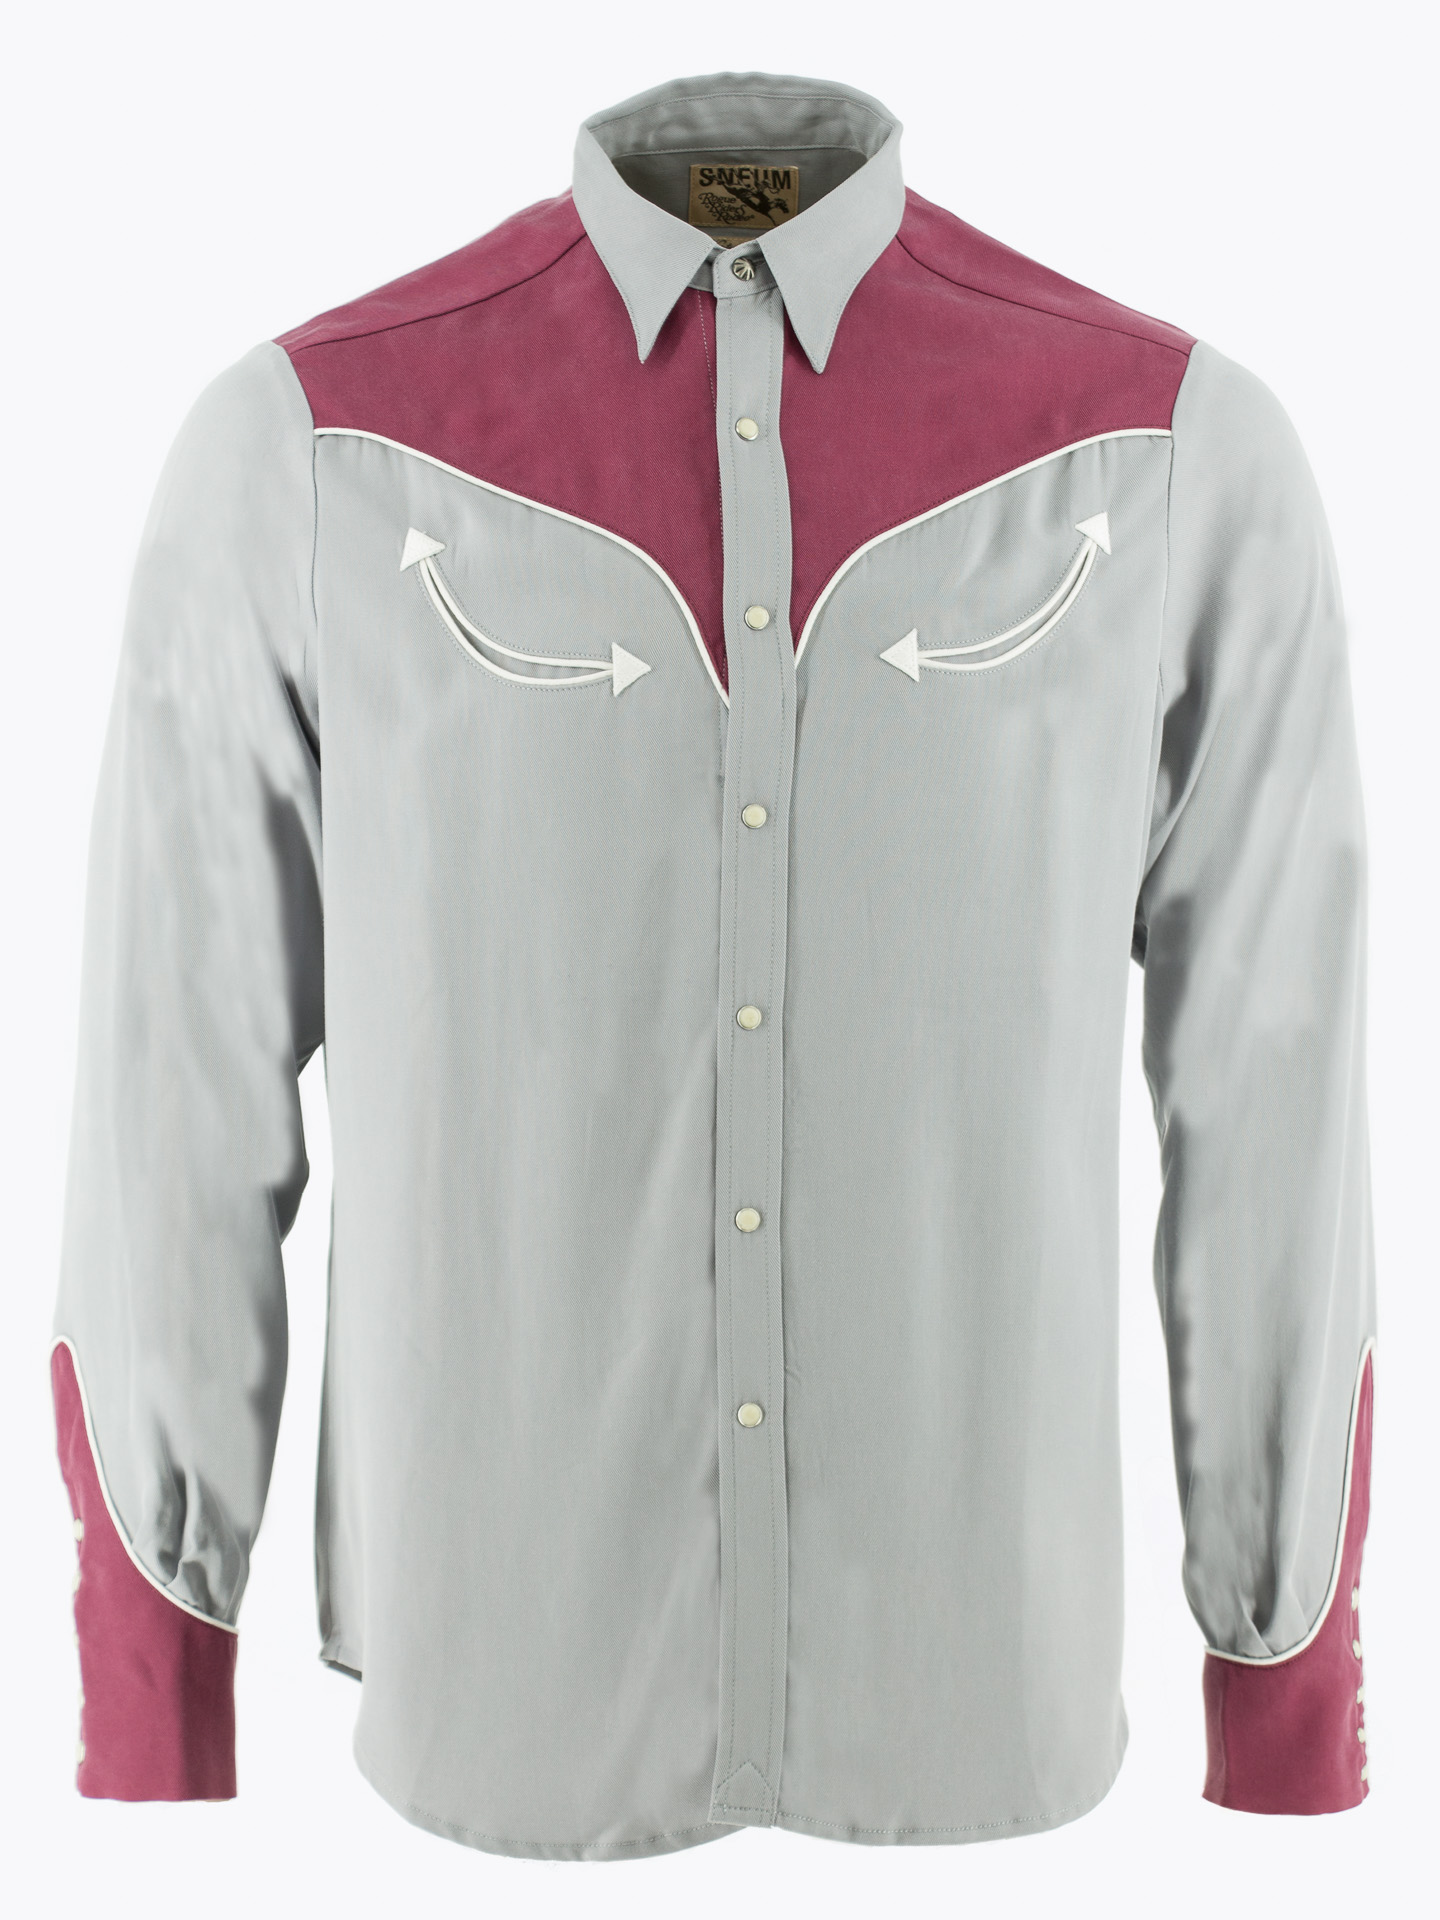 Two-tone smile pocket western shirt in grey and burgundy